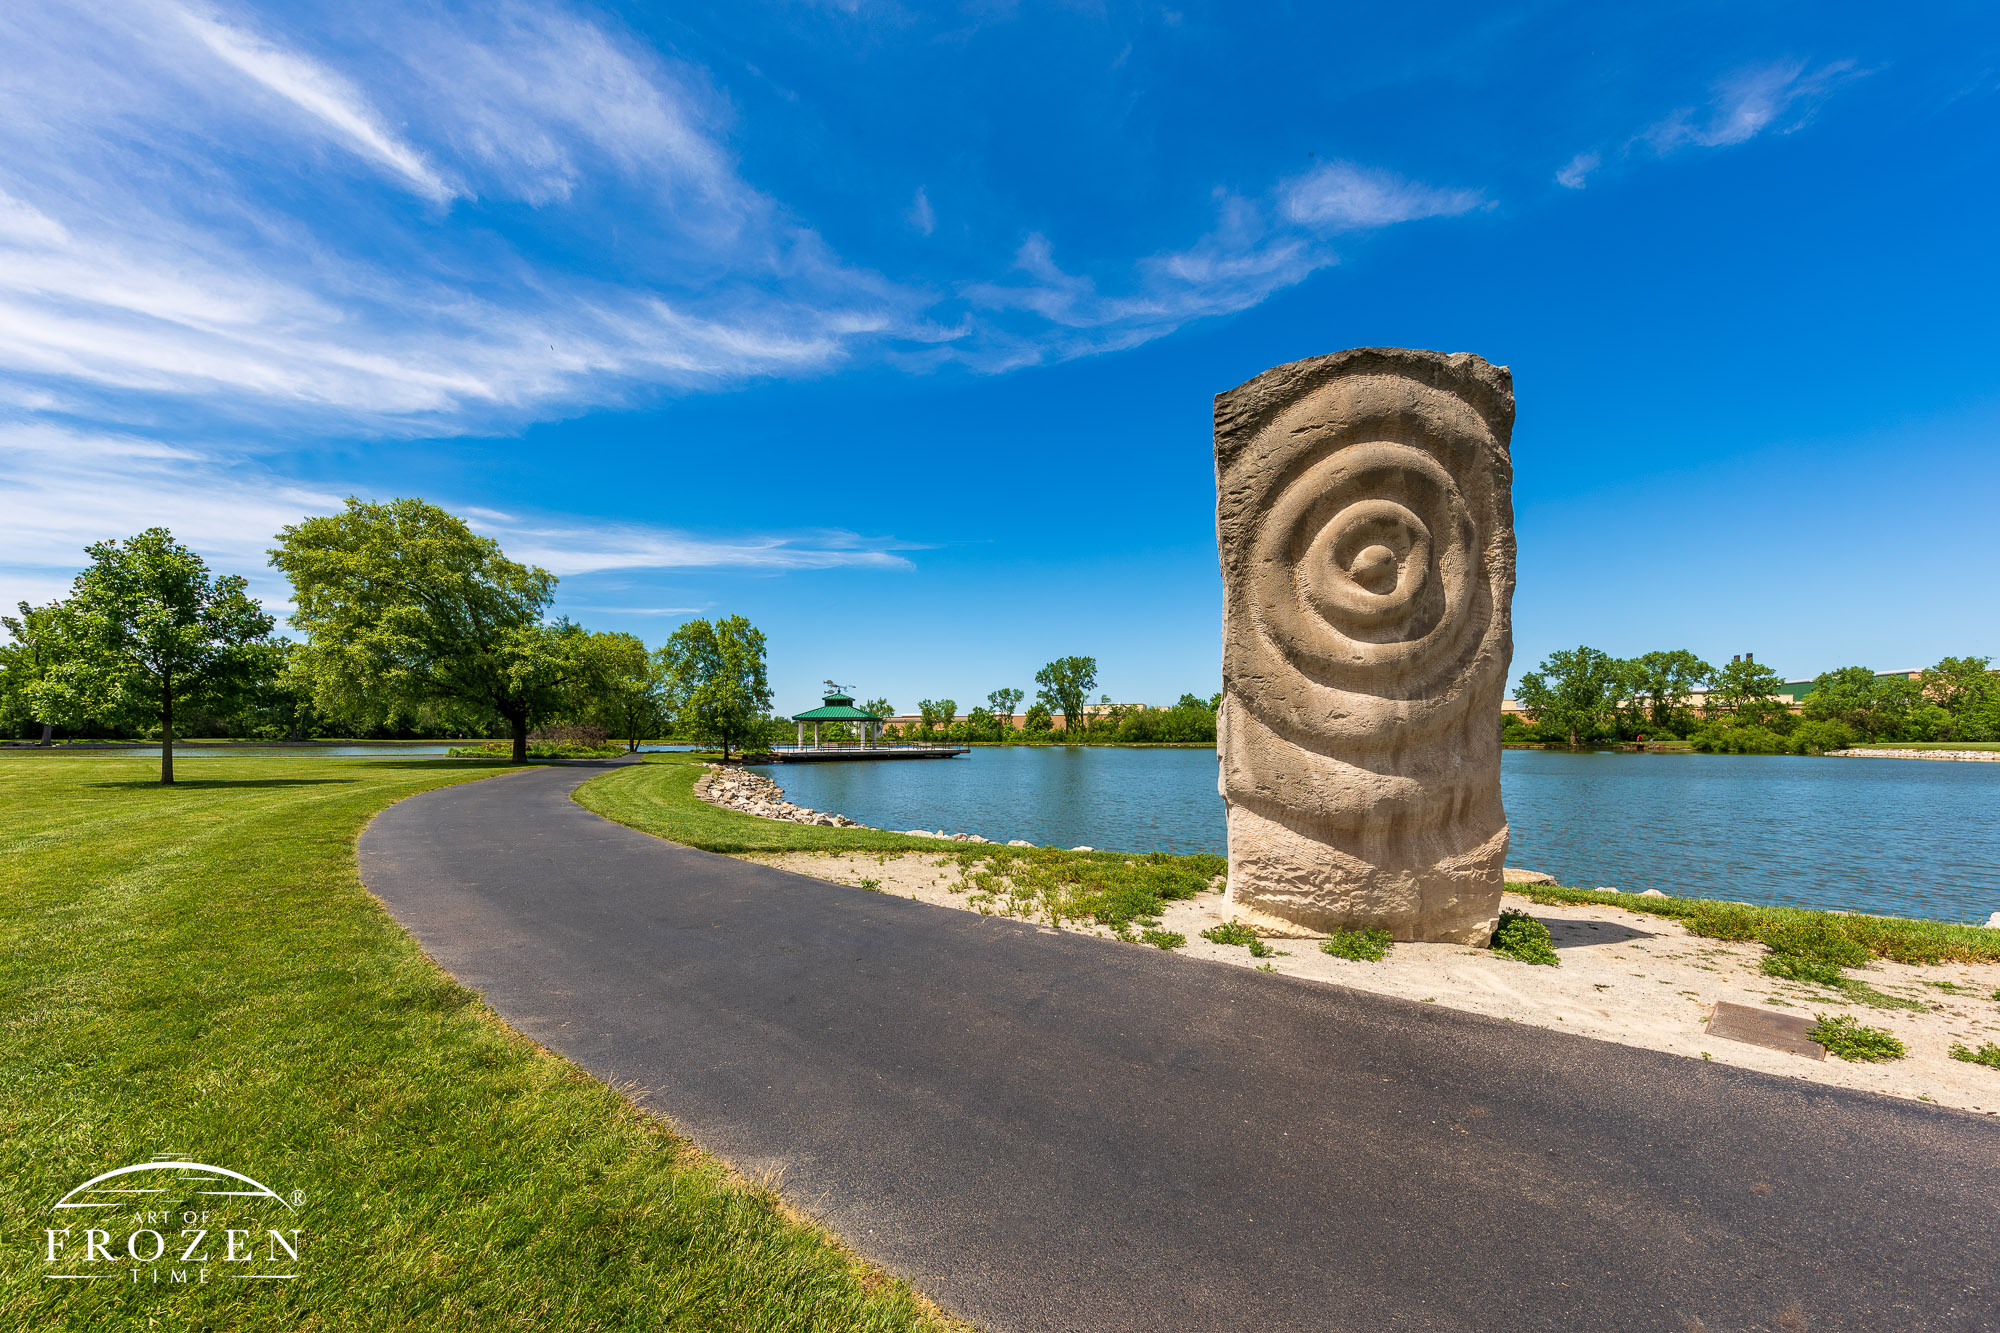 A stone sculpture depicting water ripples placed near the lake side walking path in Delco Park, Kettering Ohio.